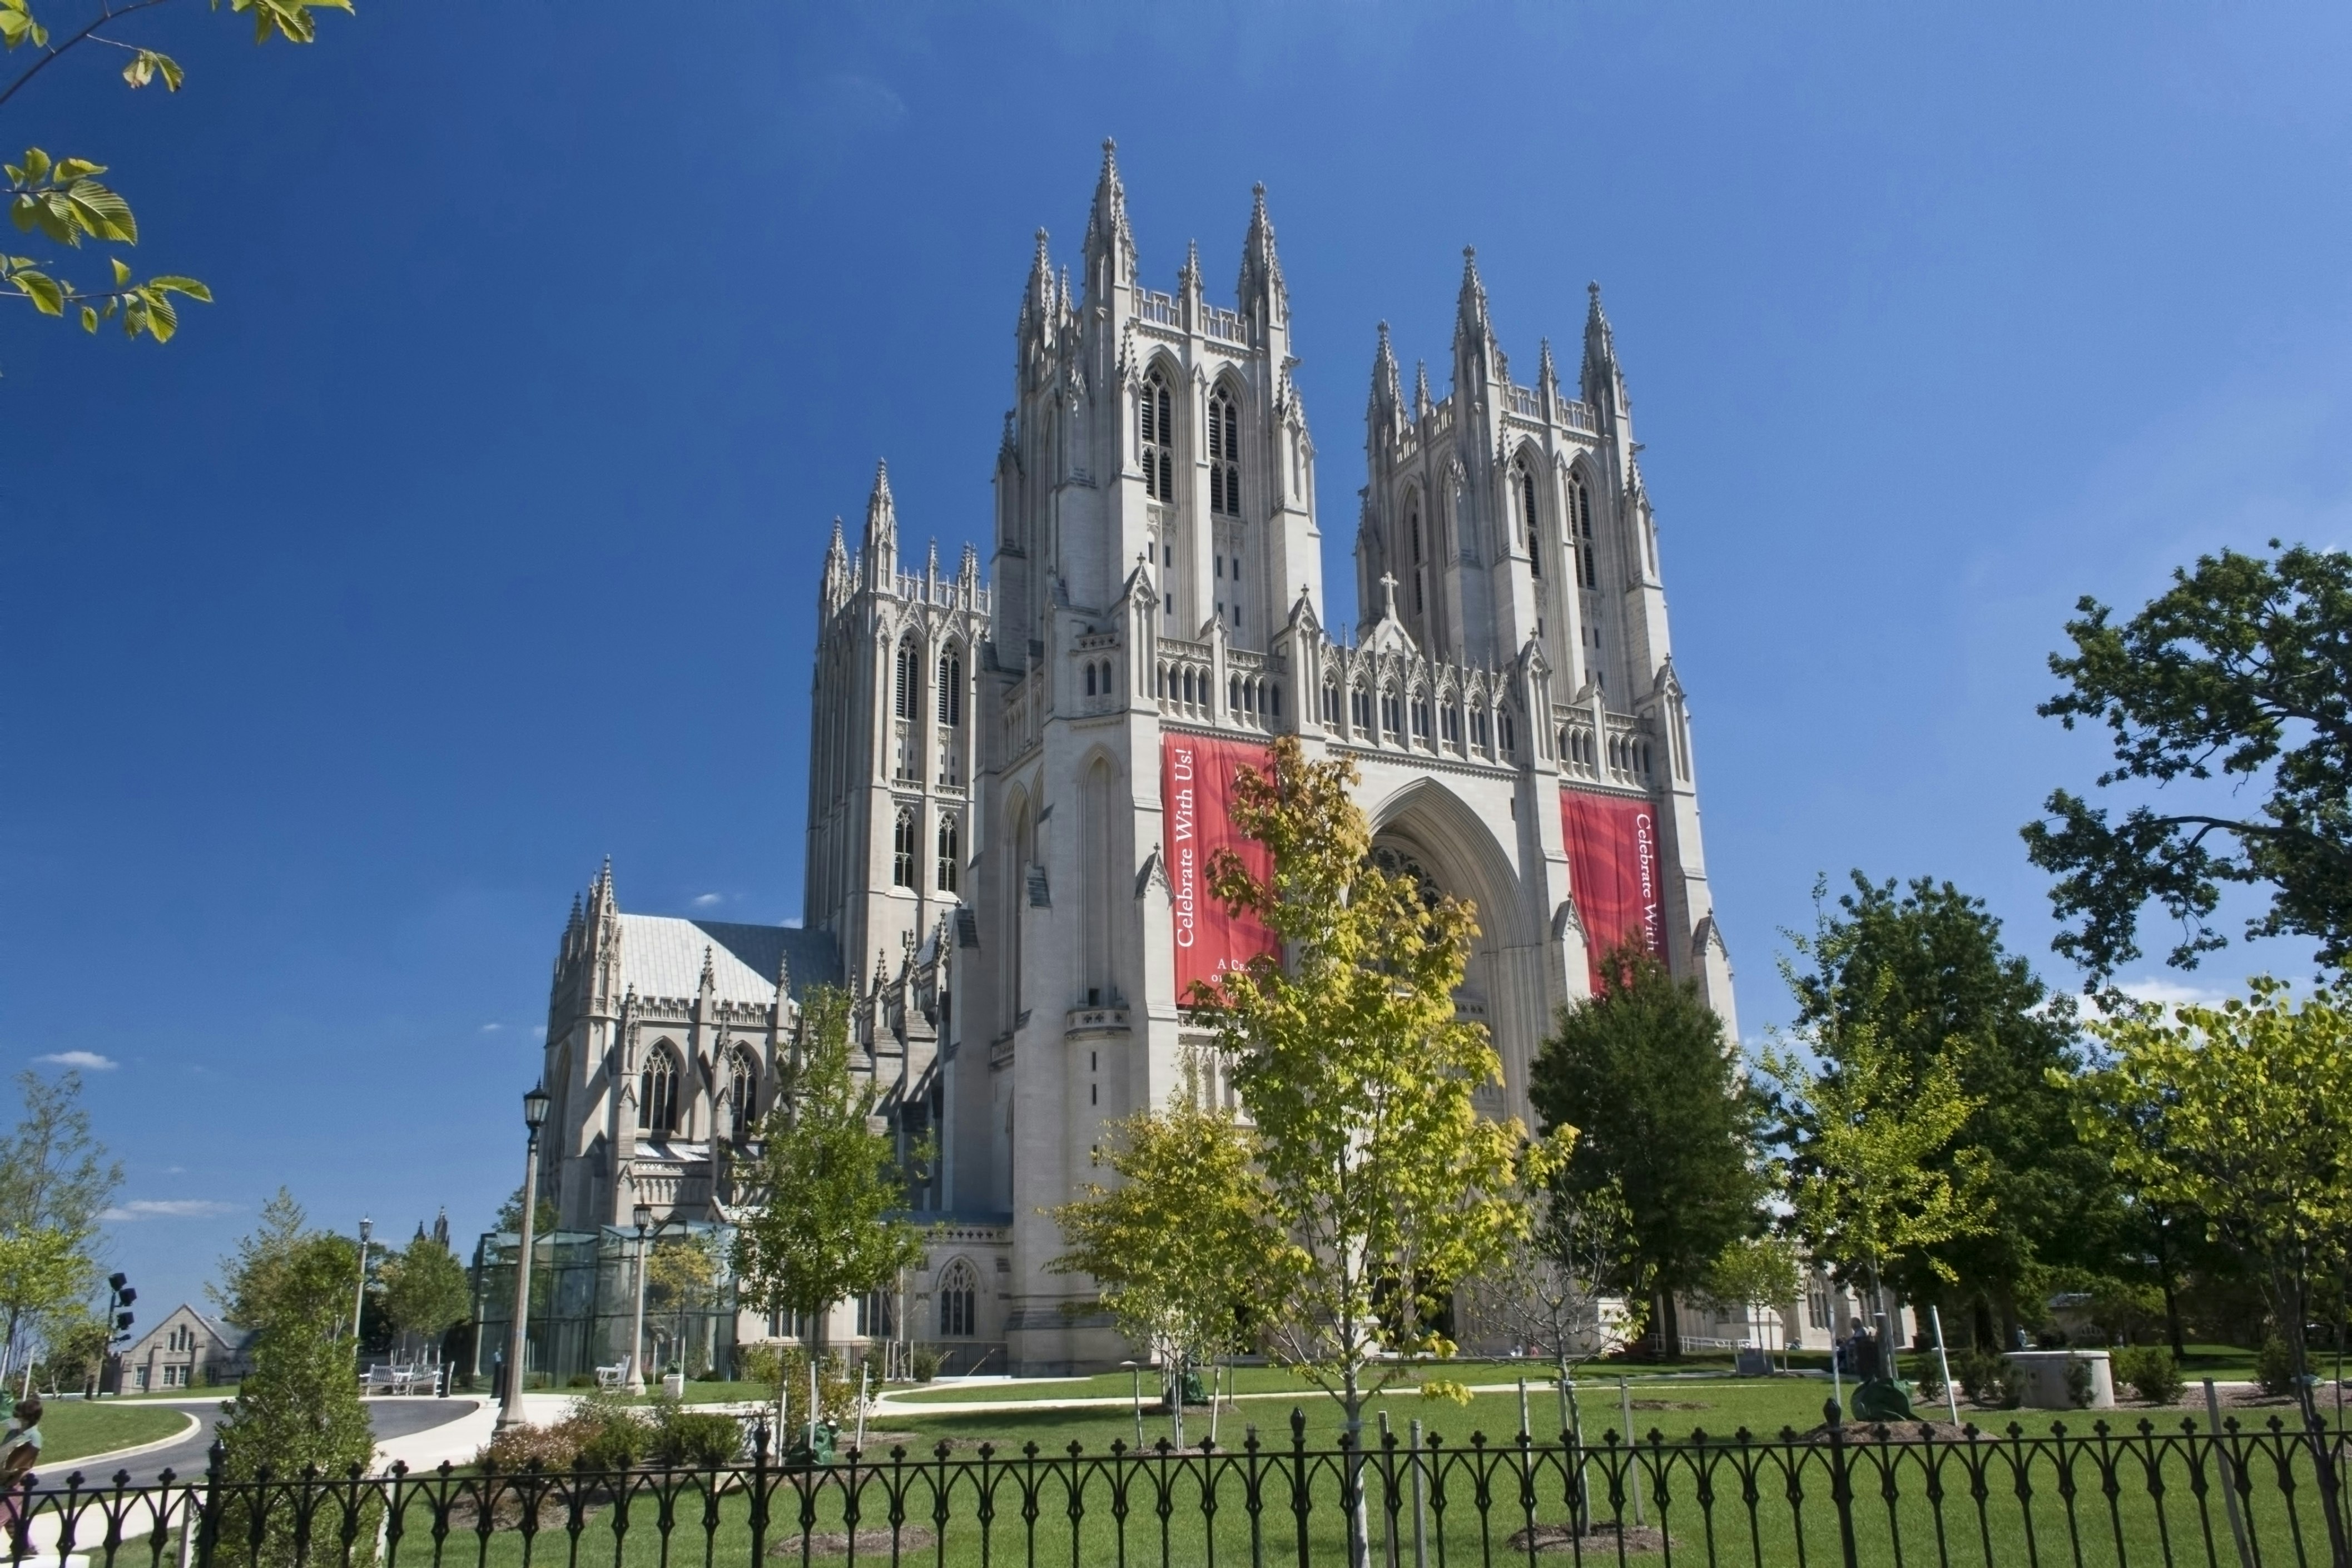 500px Photo ID: 94157925 - The National Cathedral in Washington, DC is the sixth largest cathedral in the world. The Cathedral Church of Saint Peter and Saint Paul is a cathedral of the Episcopal Church located in Washington, D.C., the capital of the United States.